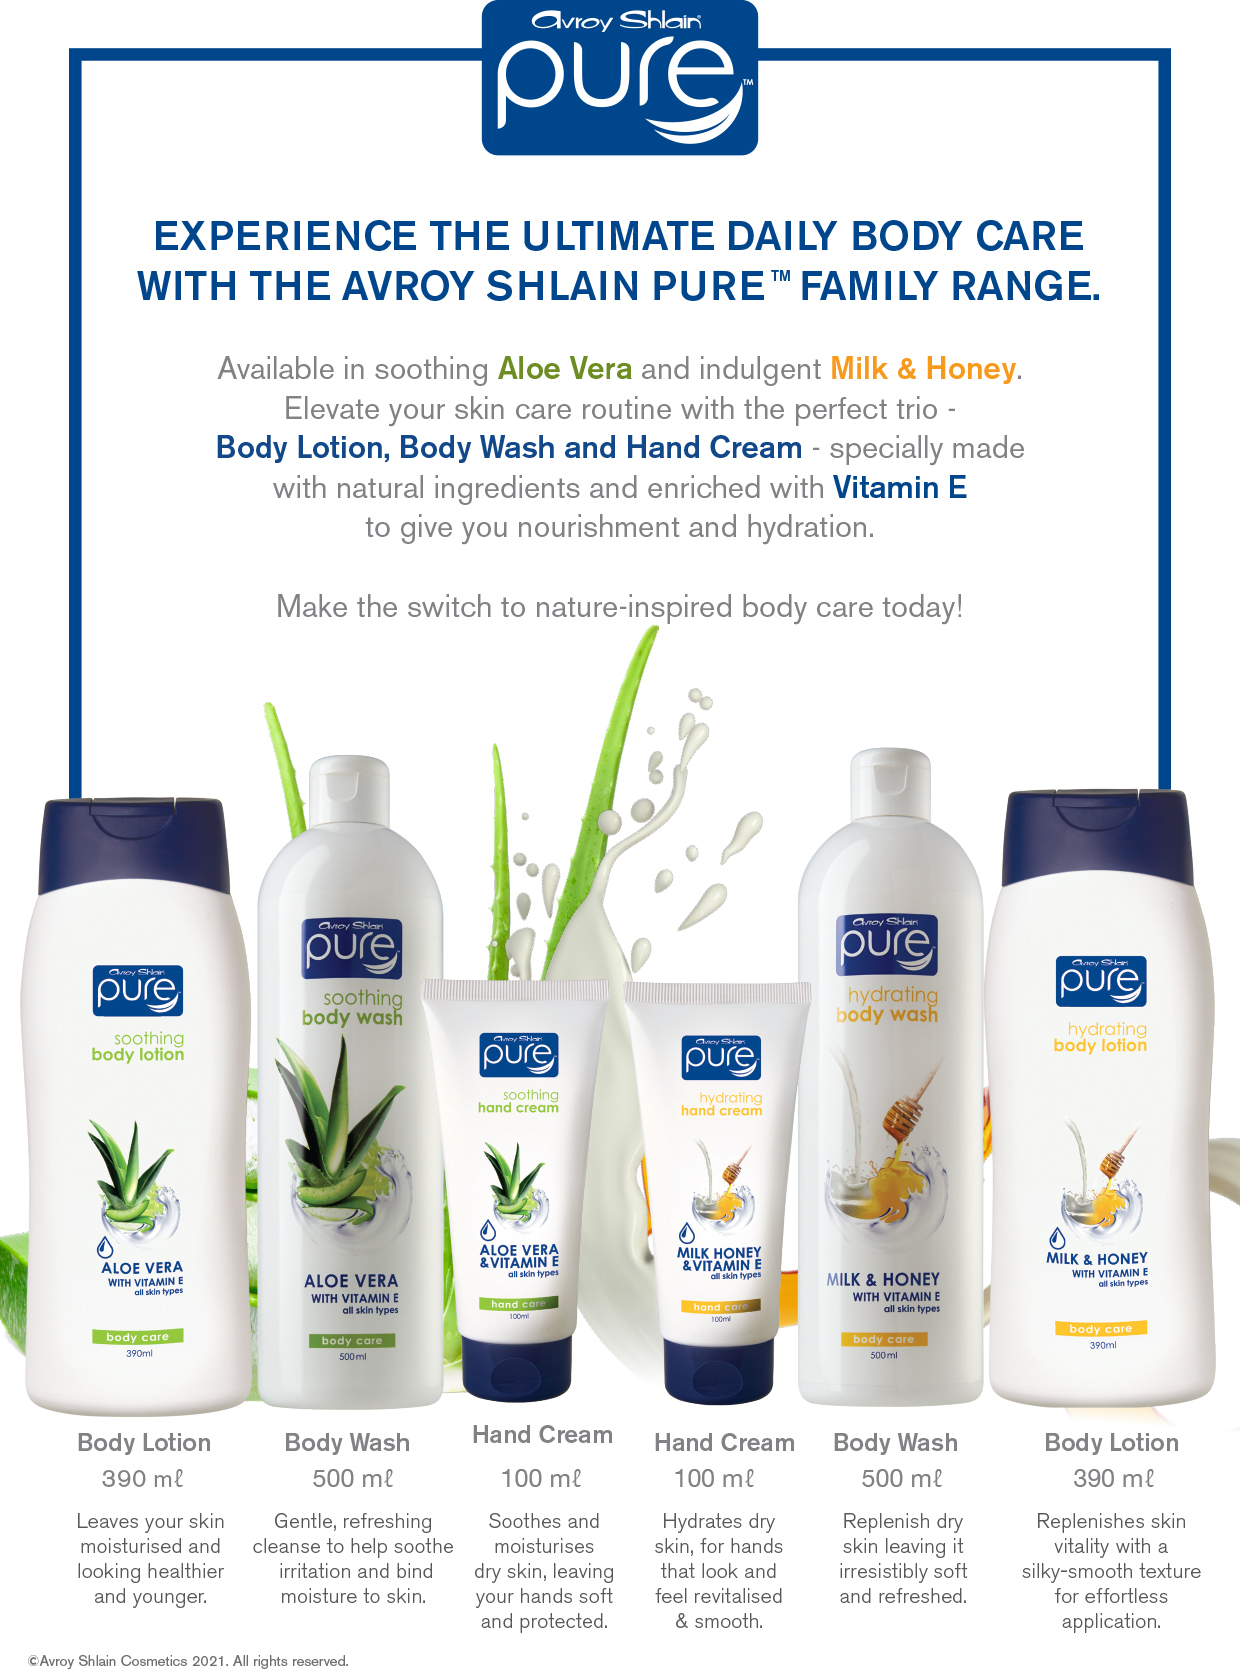 EXPERIENCE THE ULTIMATE DAILY BODY CARE WITH THE AVROY SHLAIN PURE™ FAMILY RANGE.